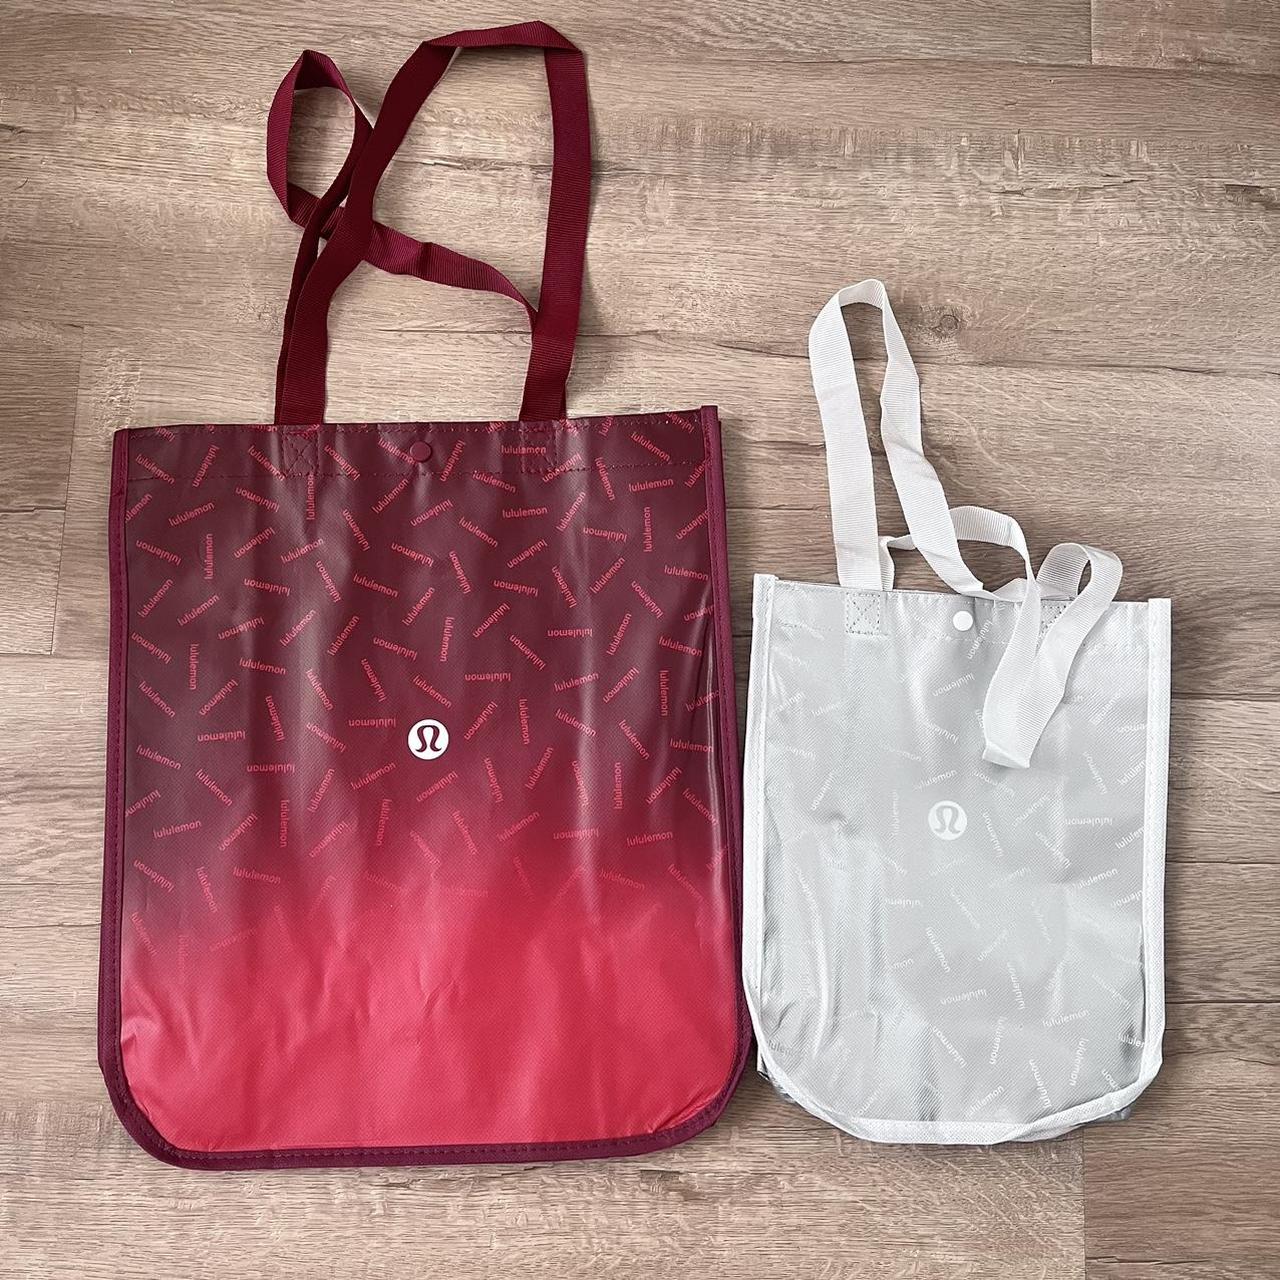 Lululemon Reusable Shopping Bags Lot of 2 Totes 12 Inch Be All In